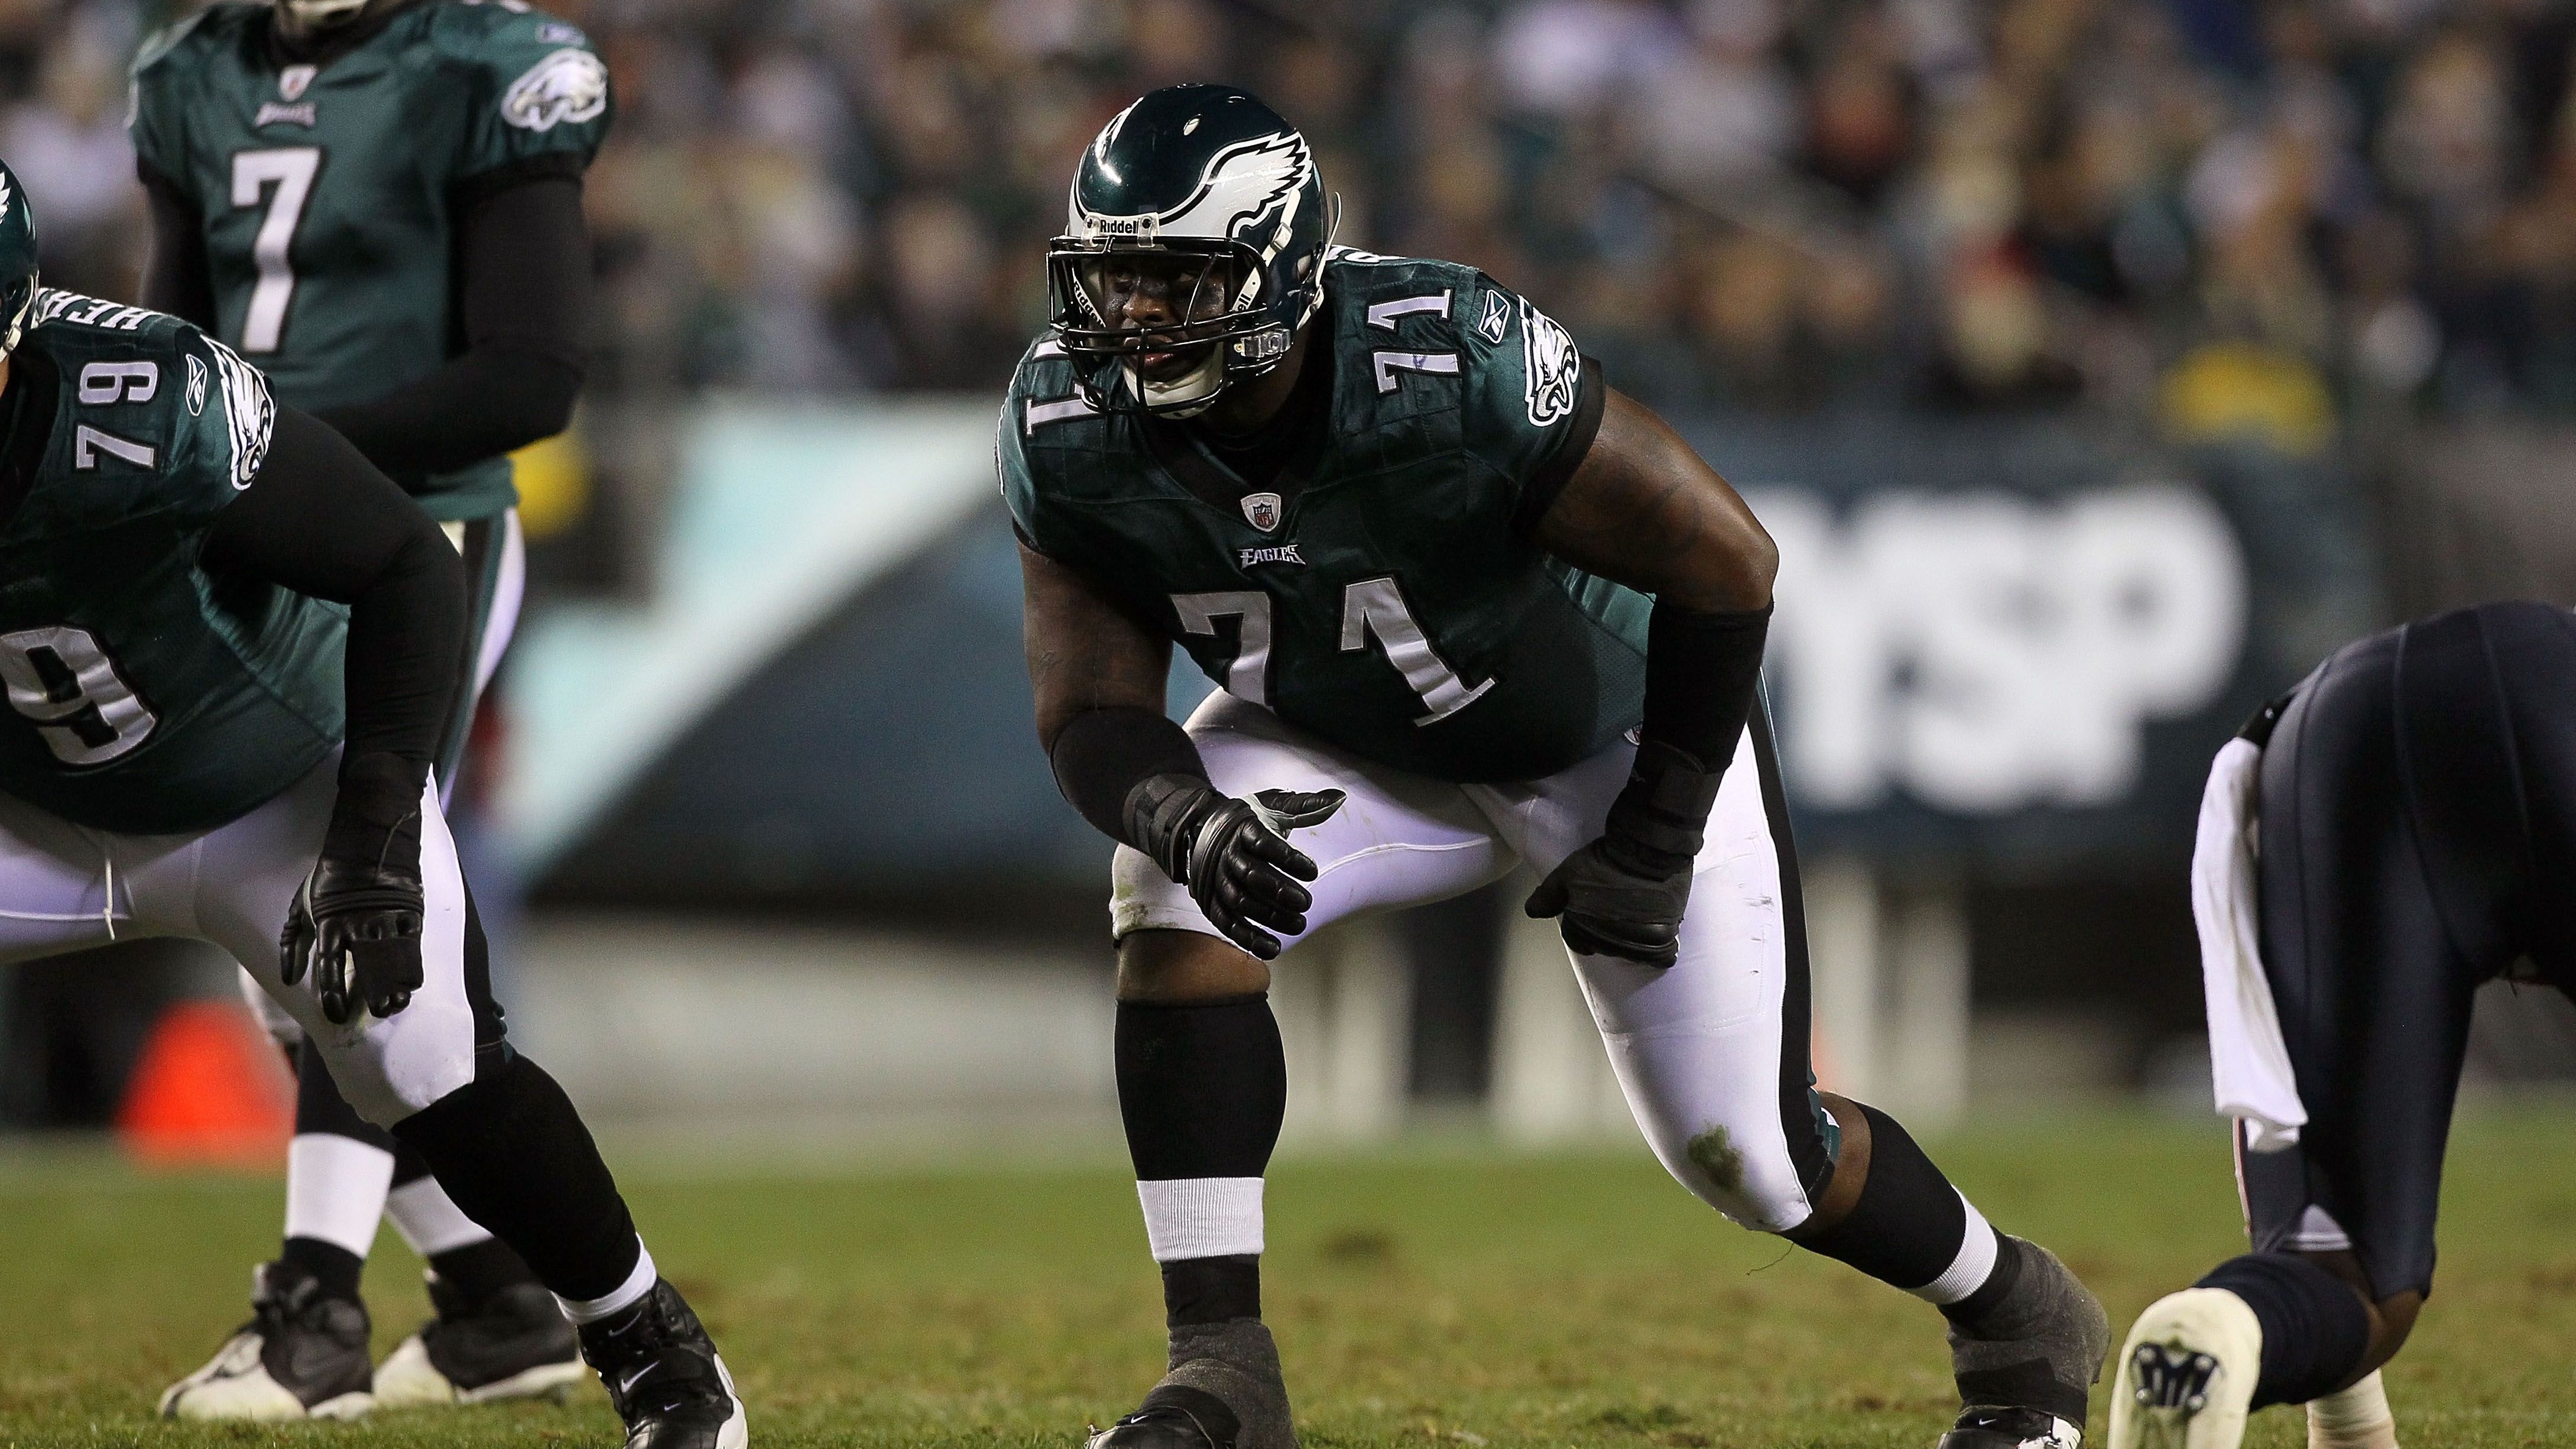 <strong>71: Jason Peters</strong><br>Teams: Philadelphia Eagles, Seattle Seahawks<br>Position: Offensive Tackle<br>Erfolge: Super-Bowl-Champion 2018, dreimaliger First Team All-Pro, neunmaliger Pro Bowler<br>Honorable Mentions: Trent Williams, Walter Jones